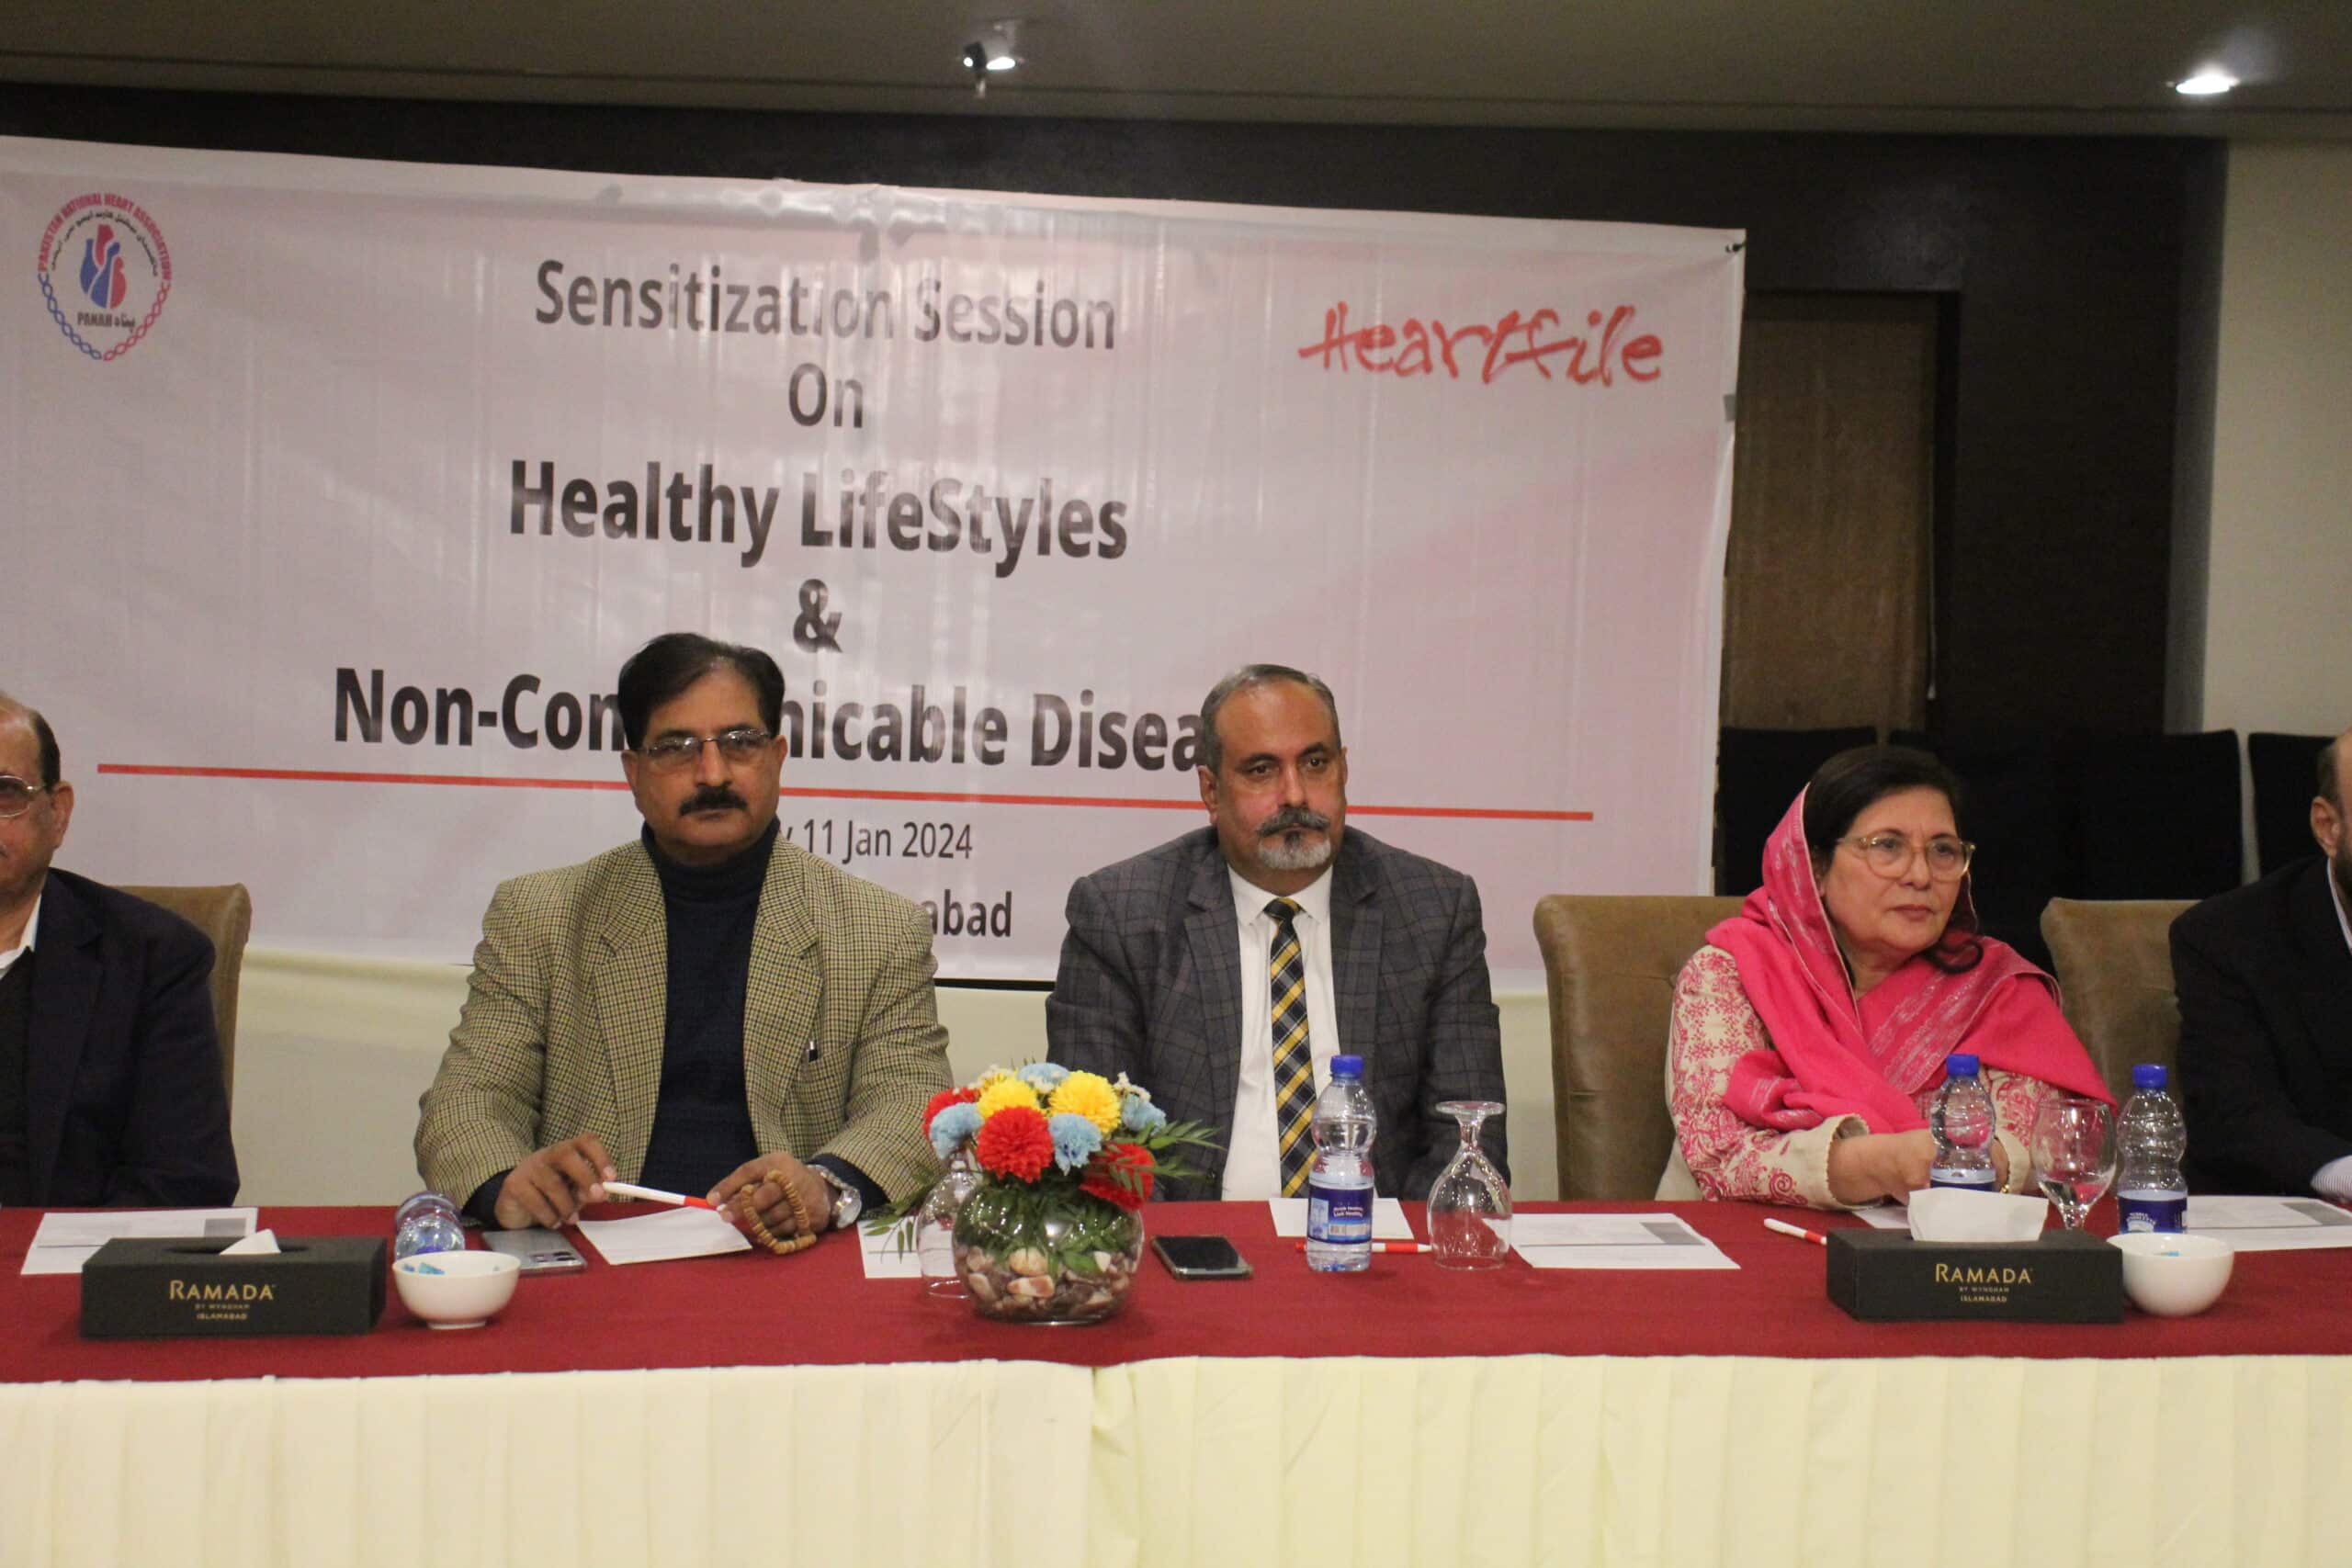 Pakistan National Heart Association (PANAH) Organized Sensitization Session on  Health harms Of Sugary Drinks & ultra- Processed Foods with the collaboration of Heart File .Venue: Ramada Hotel Islamabad .